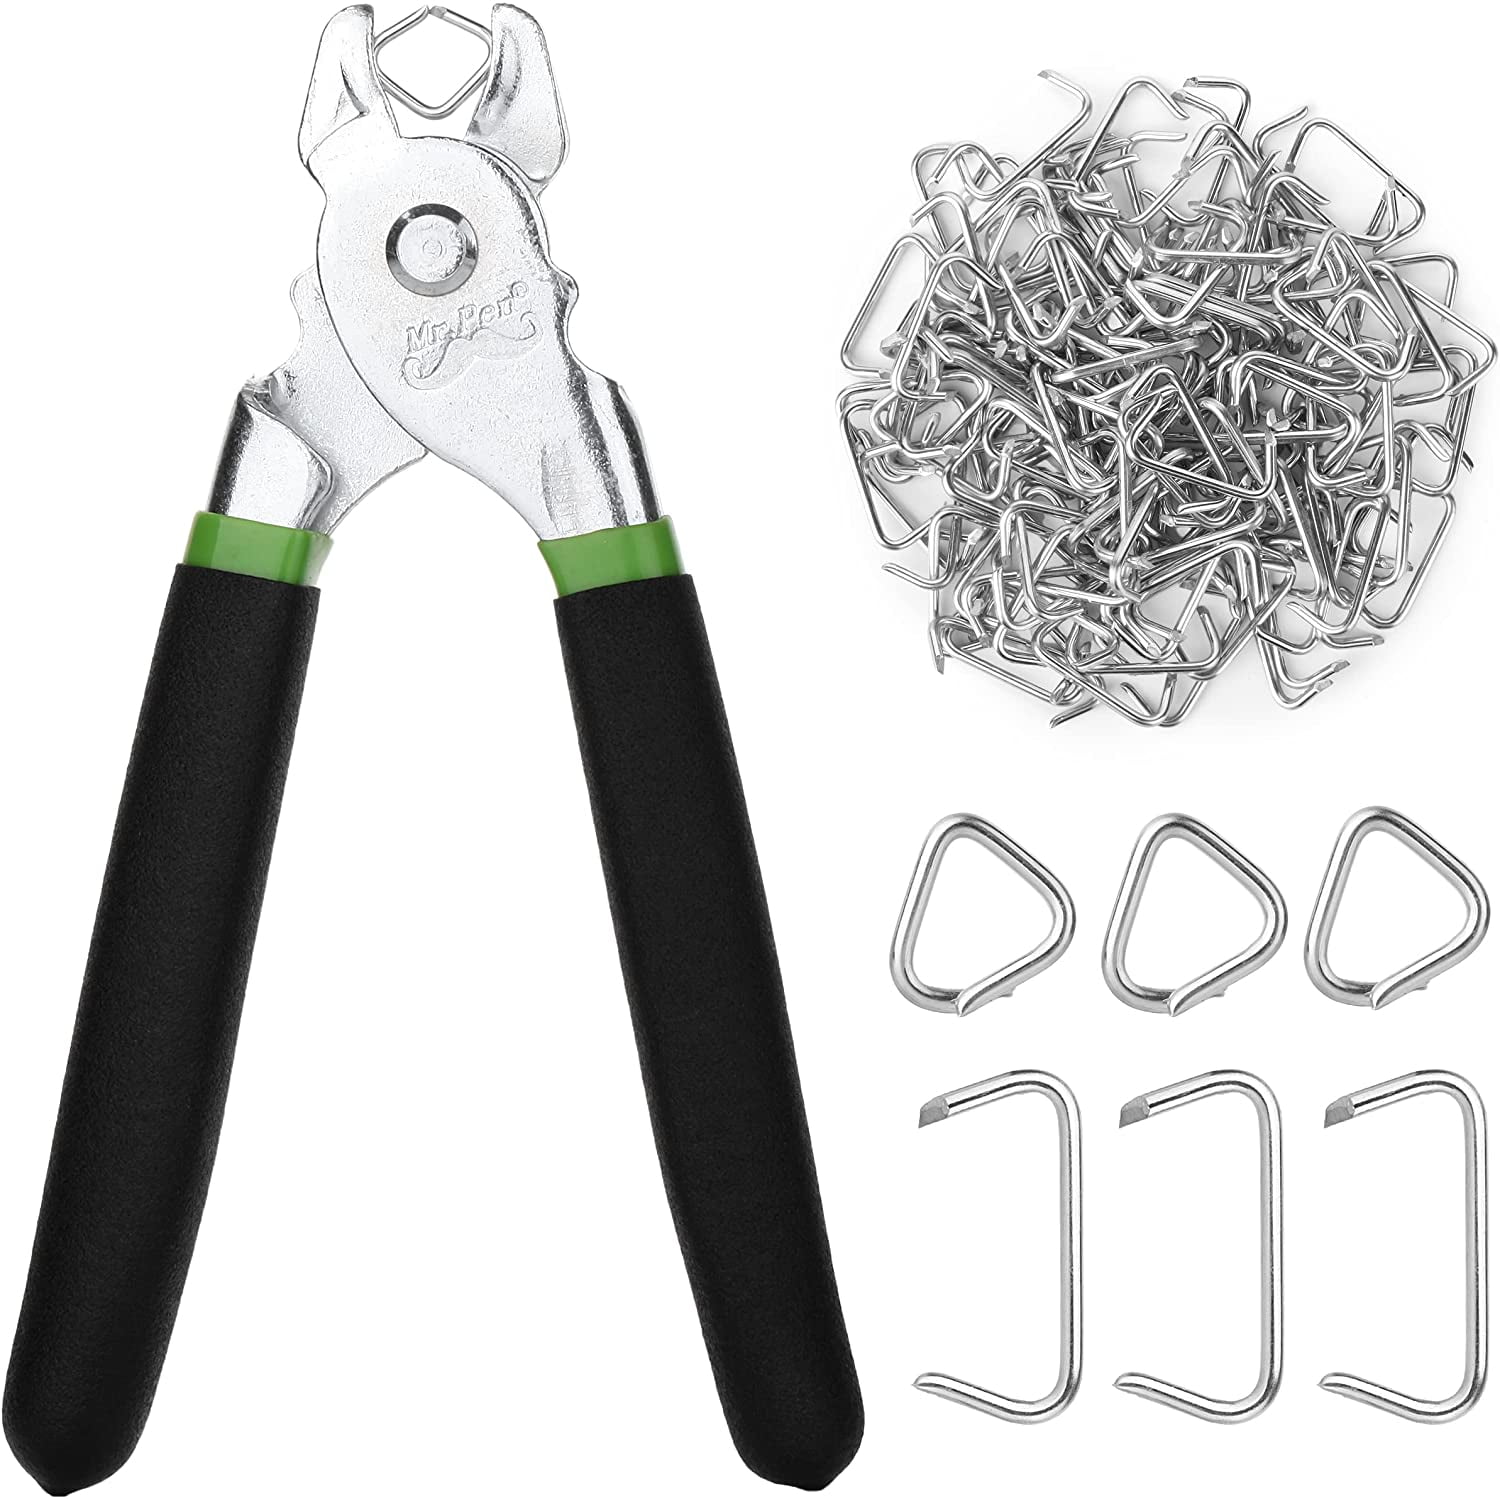 A CAMWAY Hog Ring Pliers Kit & 300pcs 3/4inch Galvanized Steel Rings 